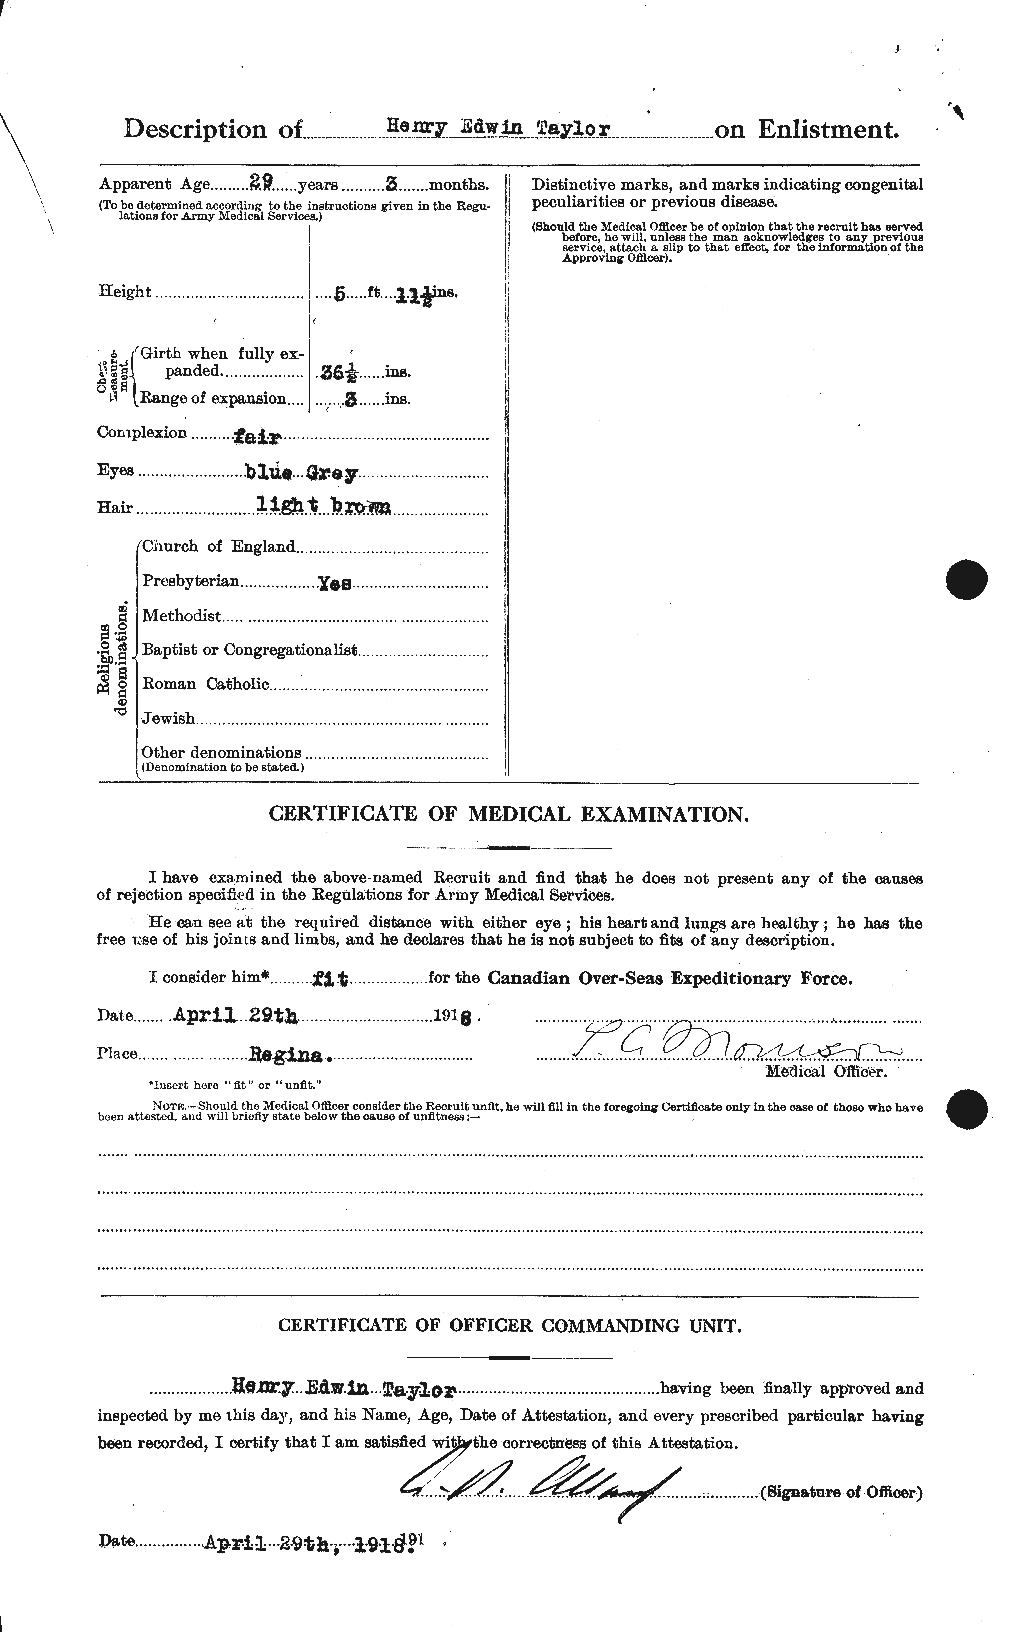 Personnel Records of the First World War - CEF 626536b